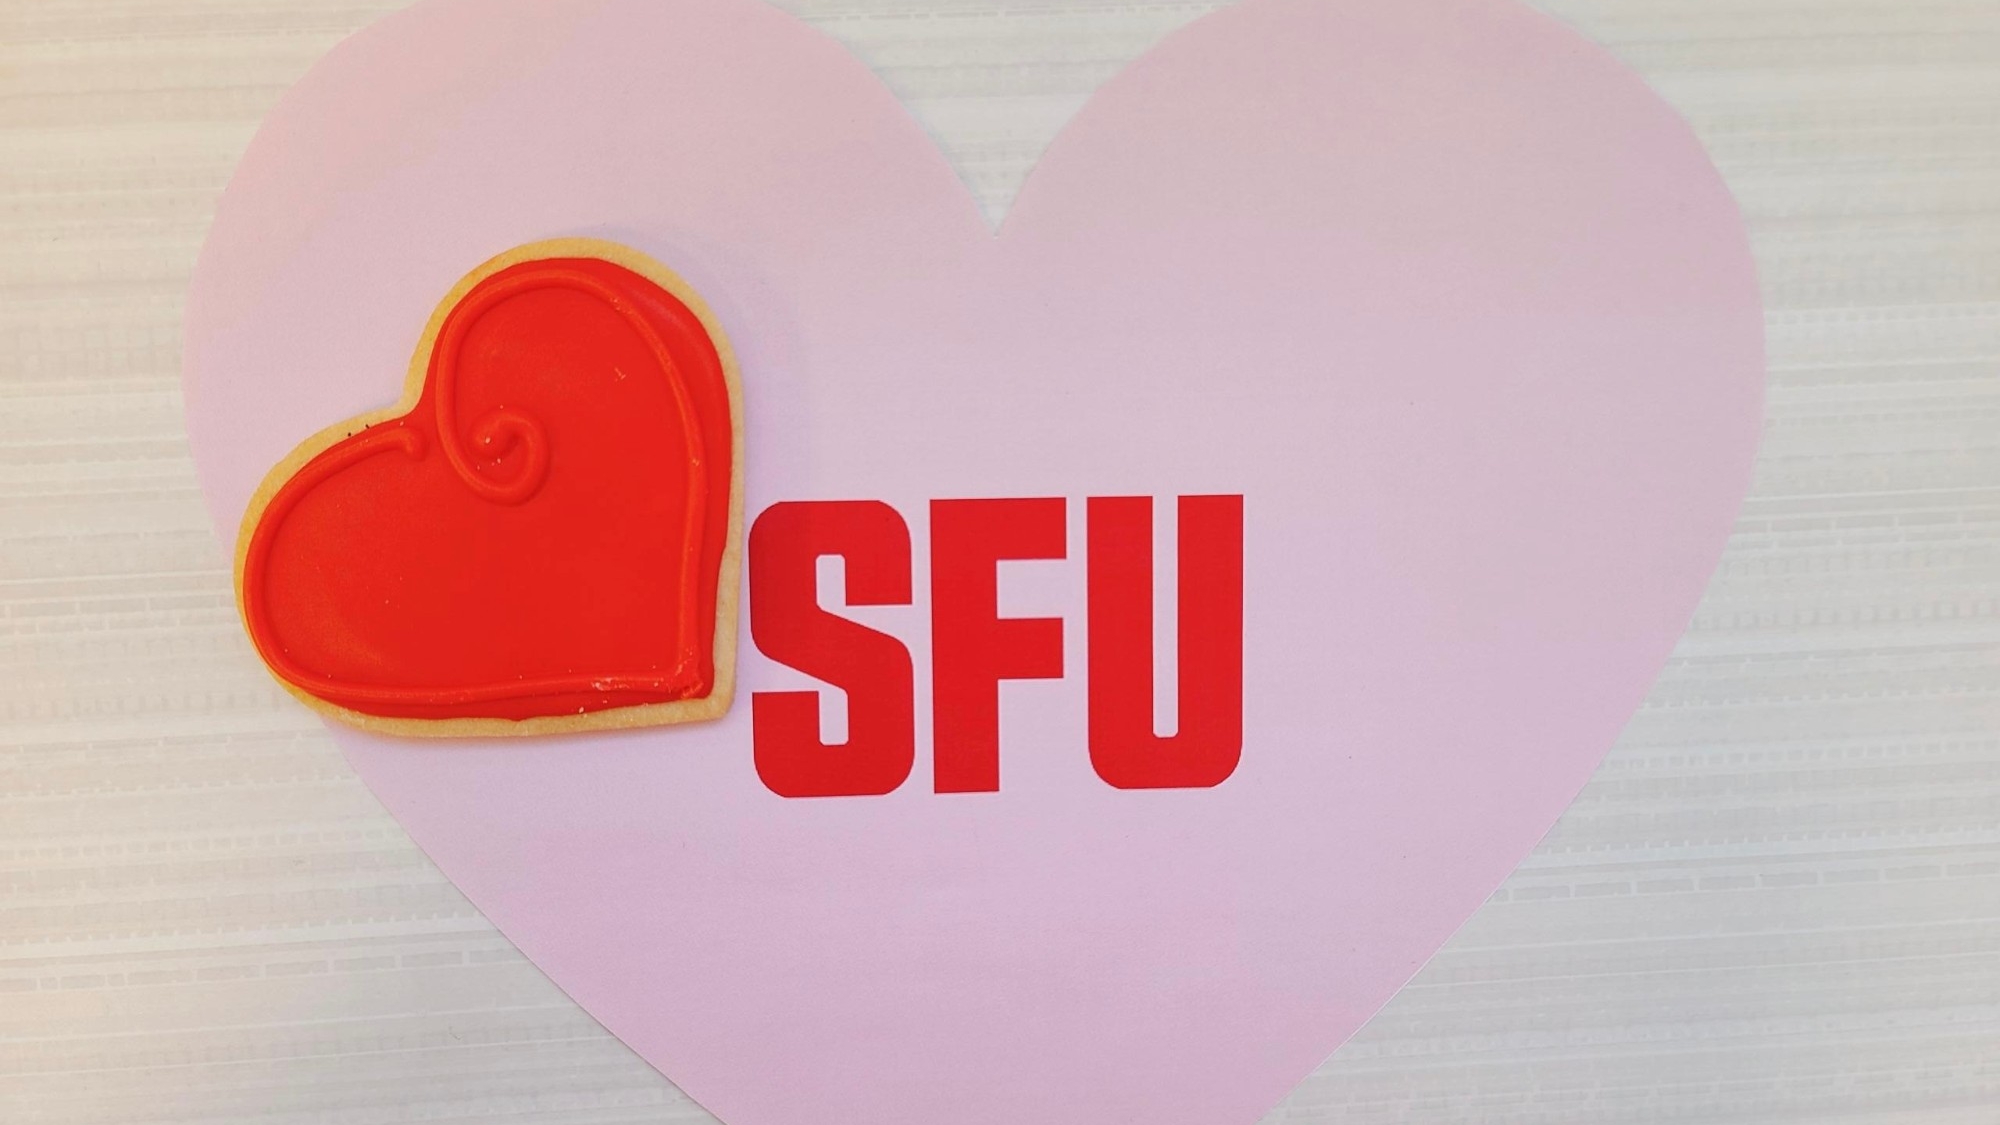 Heart-shaped cookie on top of a pink heart-shaped SFU sign